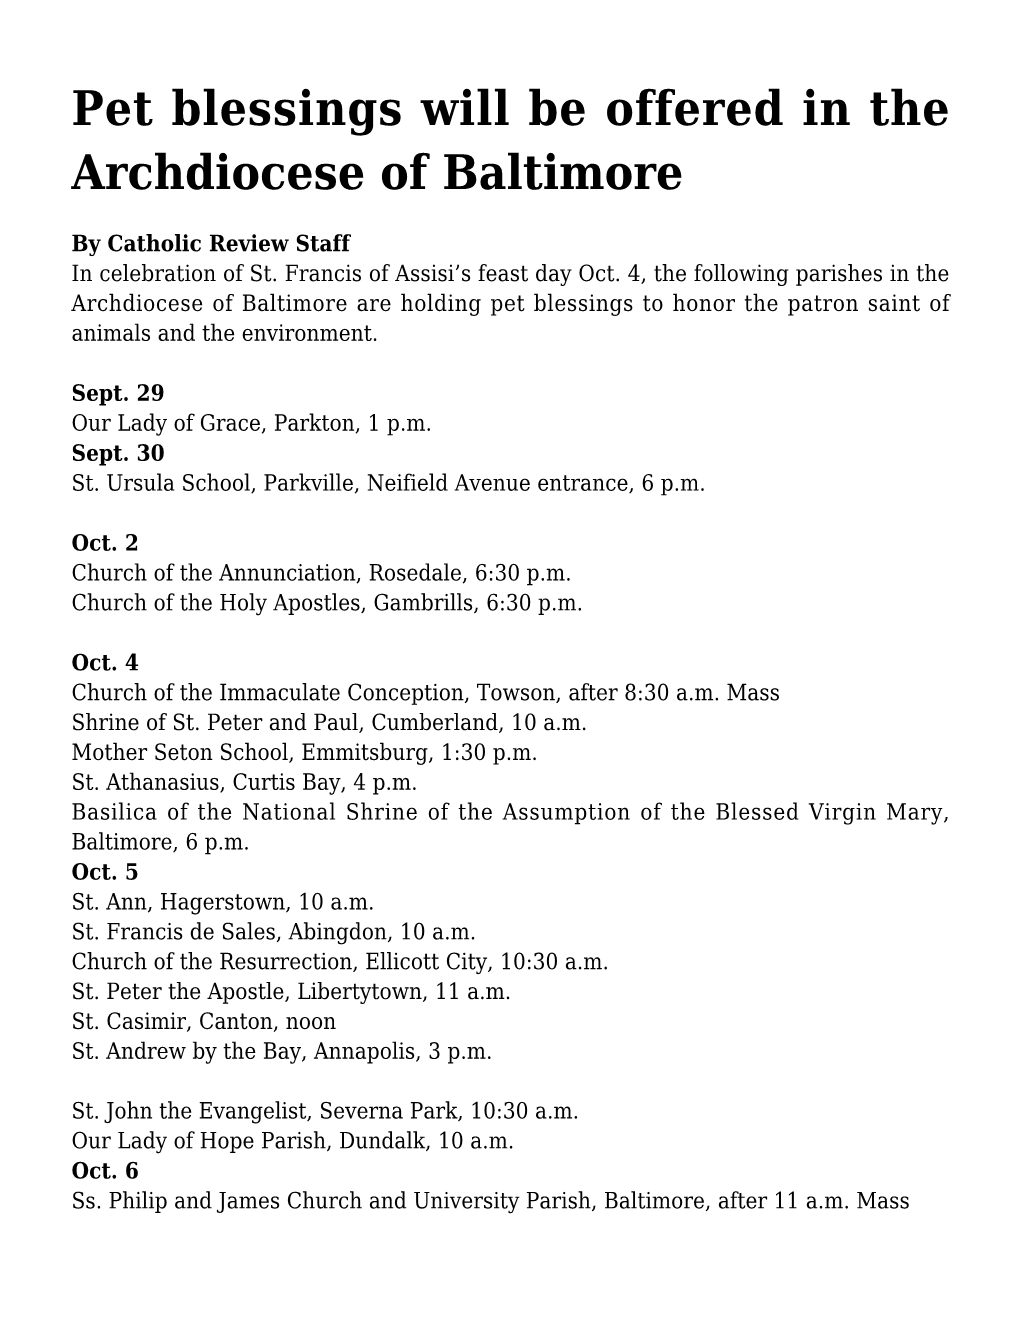 Pet Blessings Will Be Offered in the Archdiocese of Baltimore